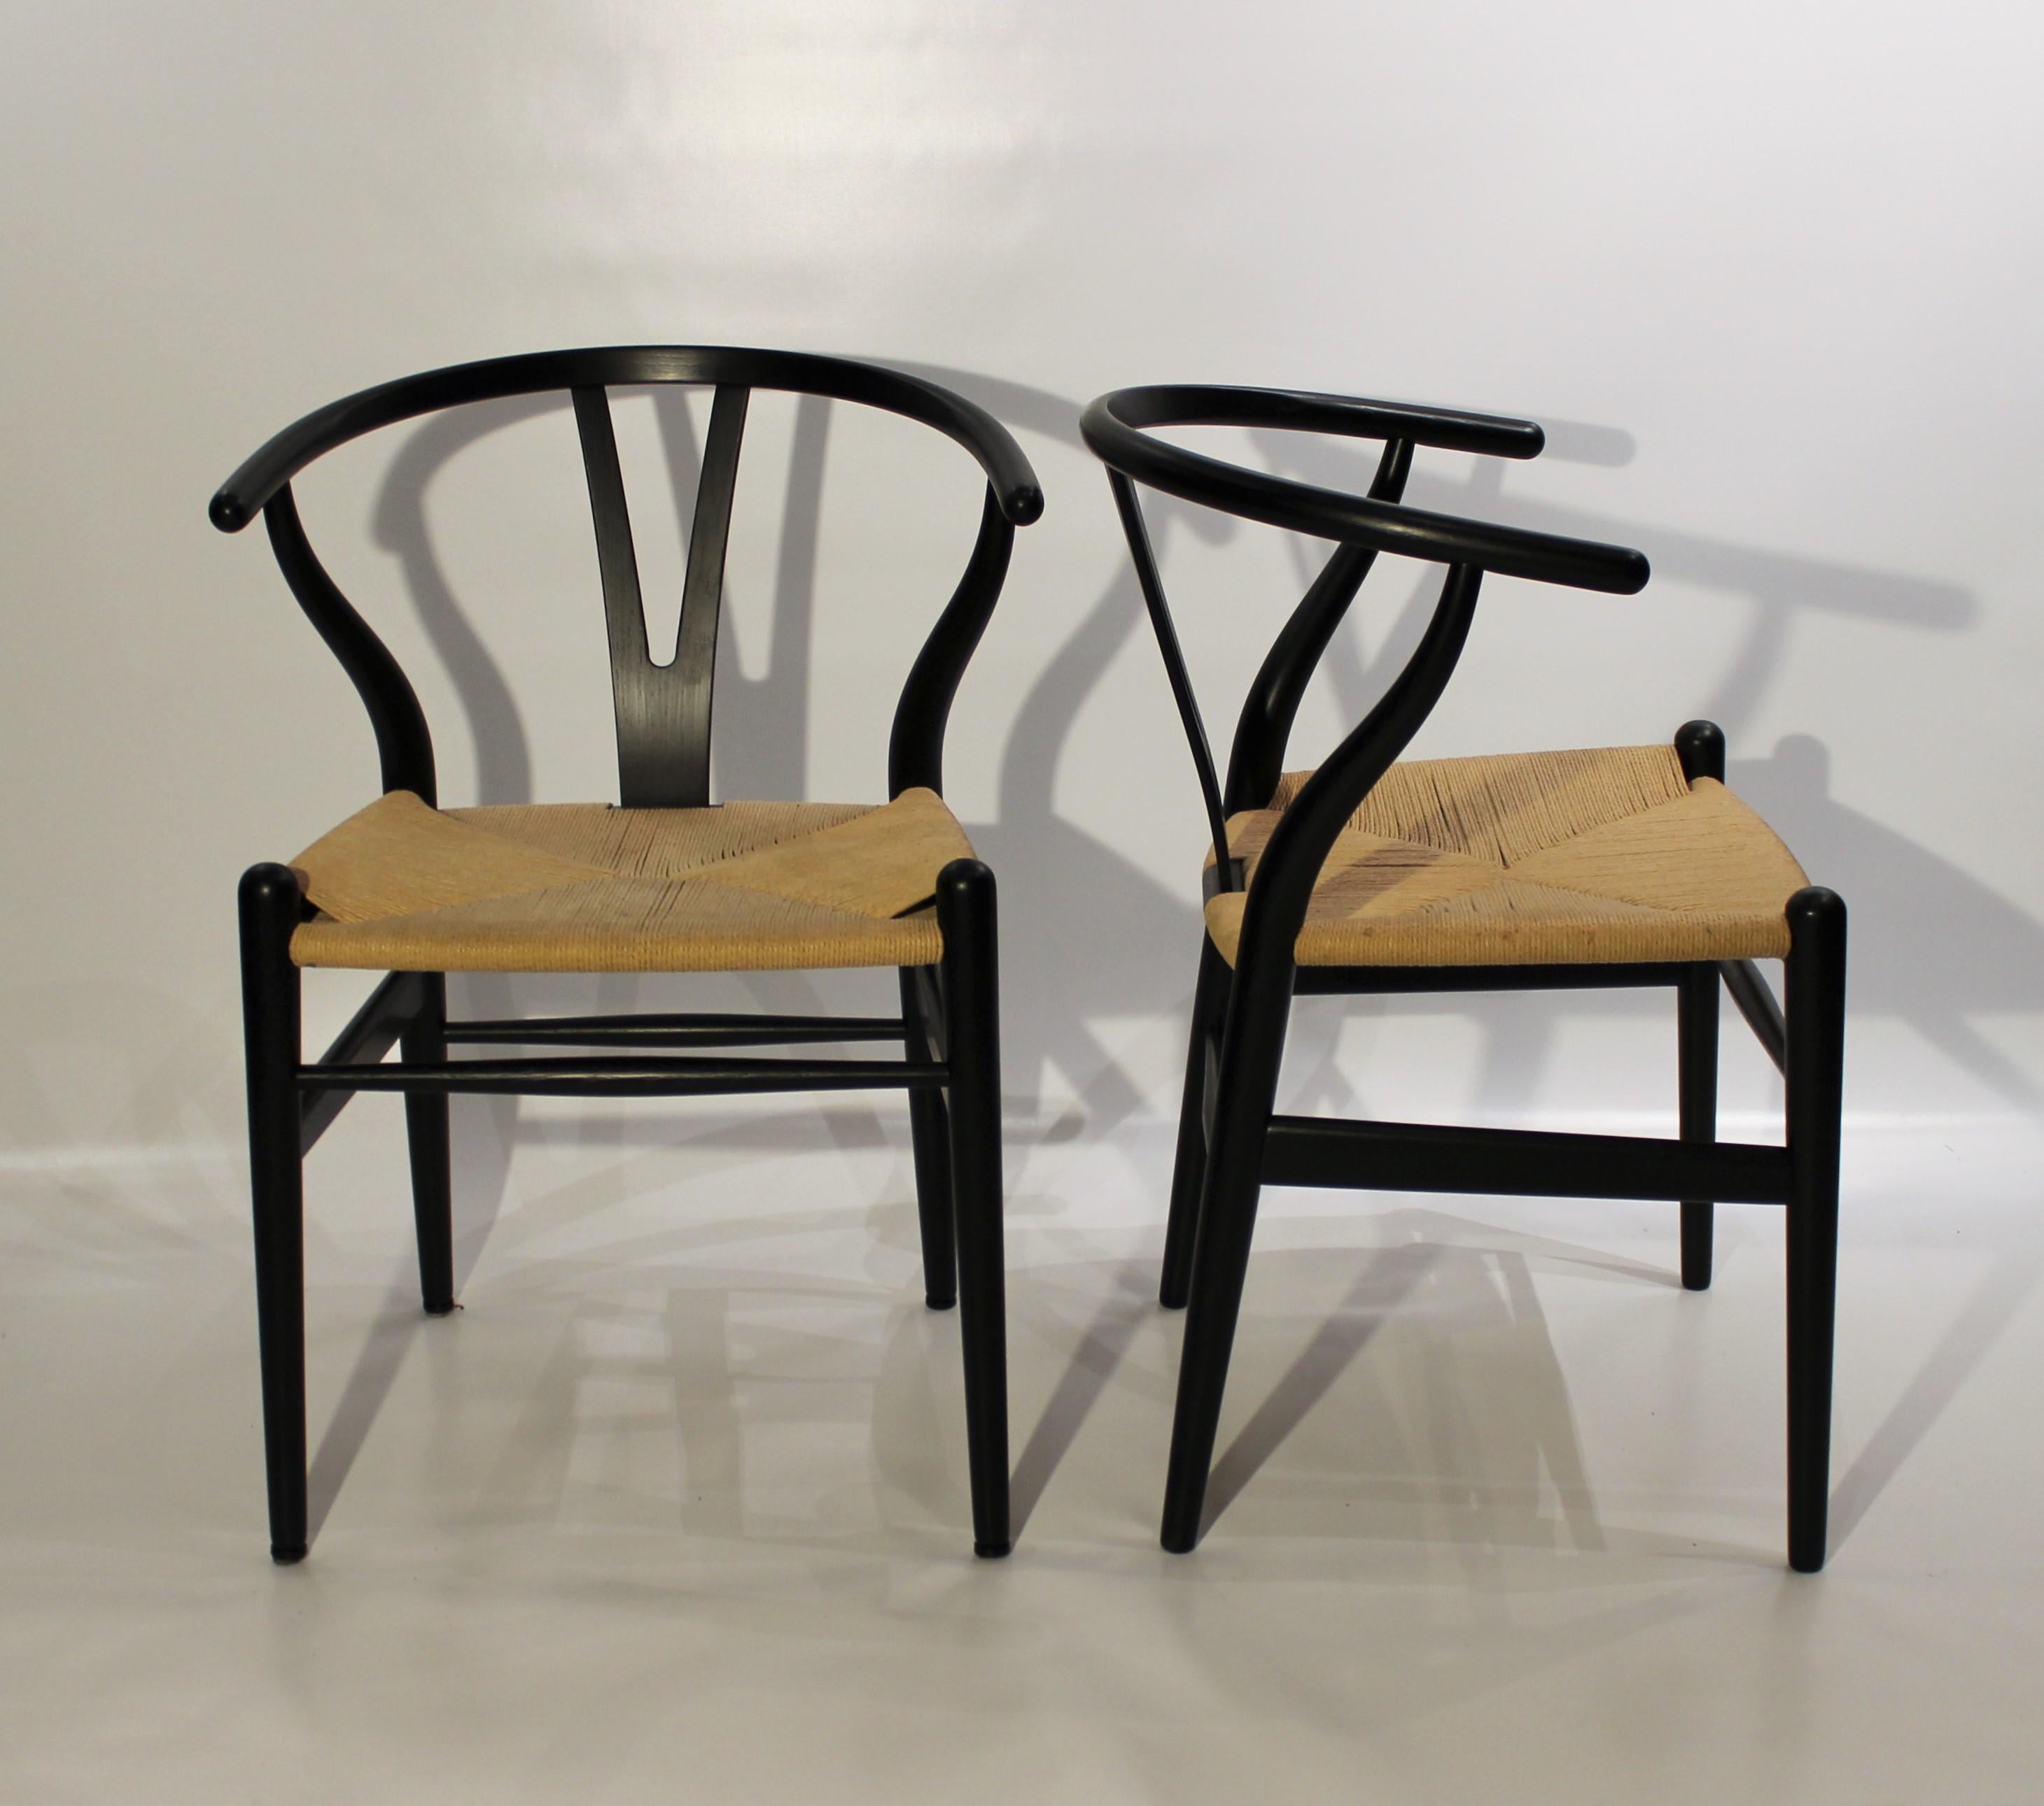 A pair of wishbone chairs, Y-chair, model CH24, designed by Hans J. Wegner in the 1950s and manufactured by Carl Hansen & Son in 2008. The chairs are with papercord seat and black painted ash.